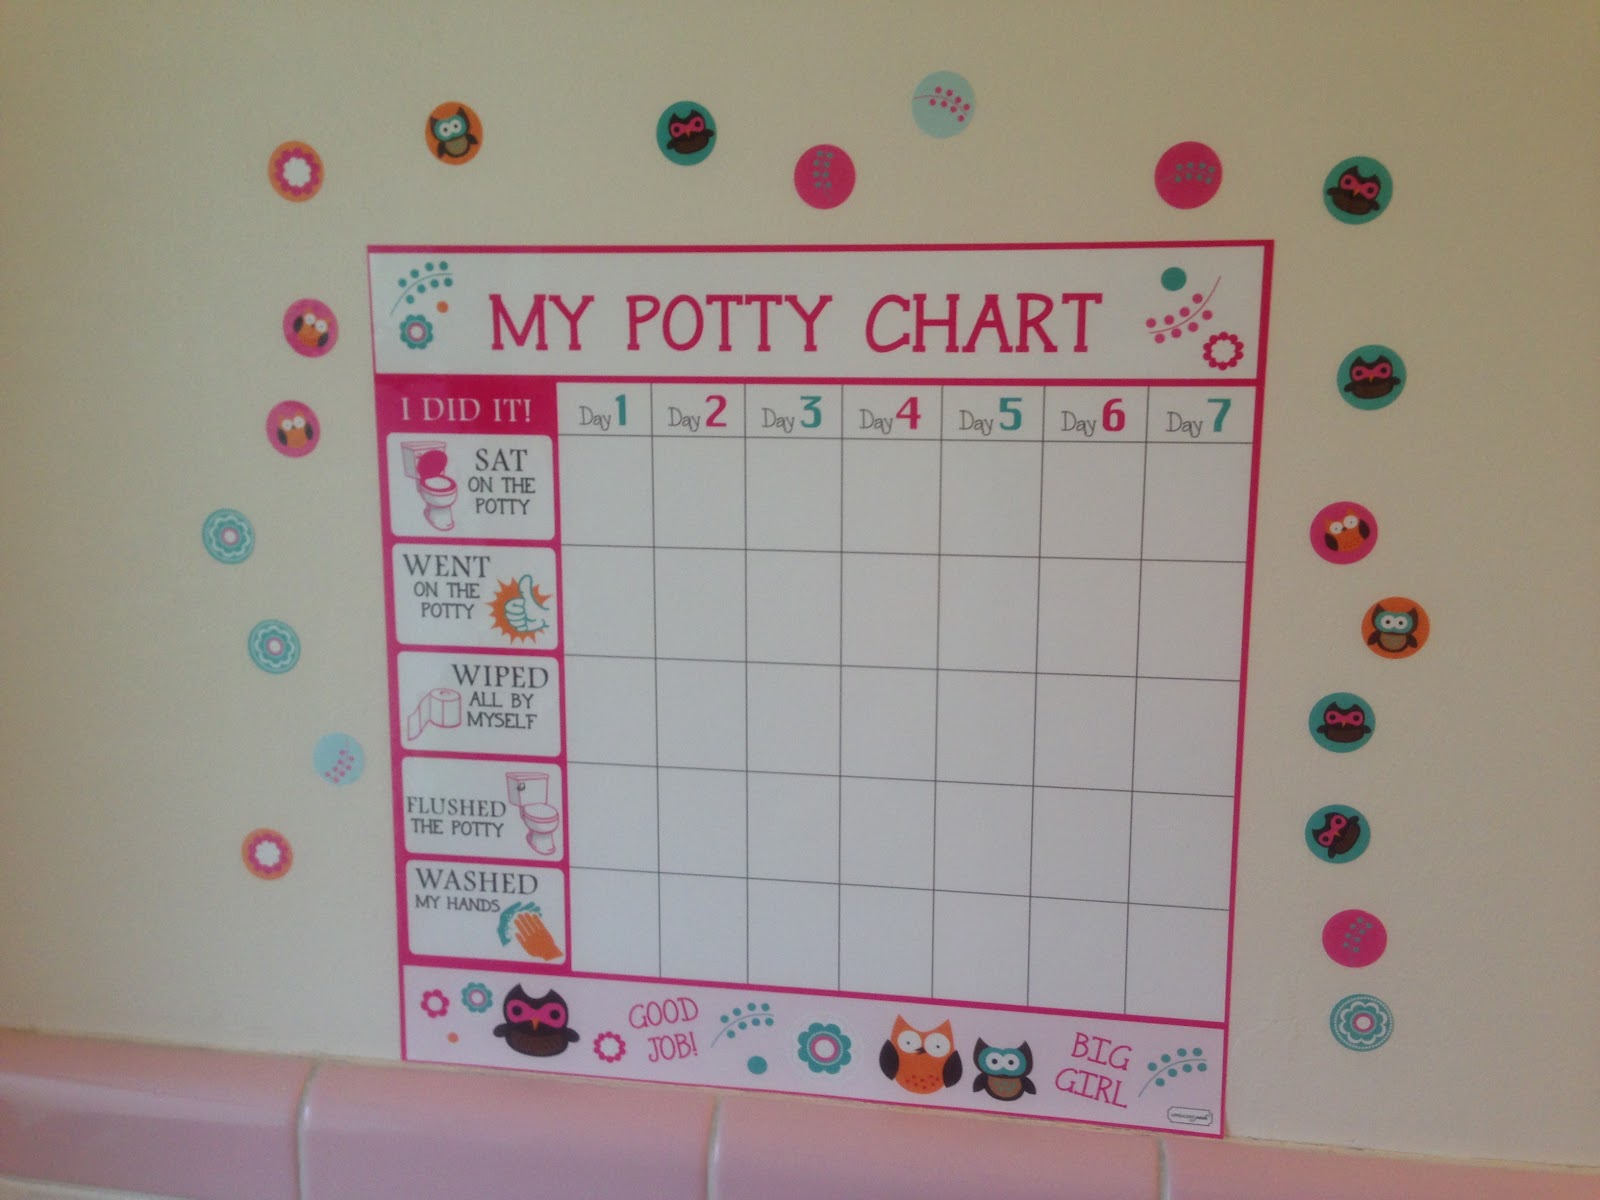 ScriptureArt Potty &amp; Chore Charts Are Artwork that Help Out Around the 